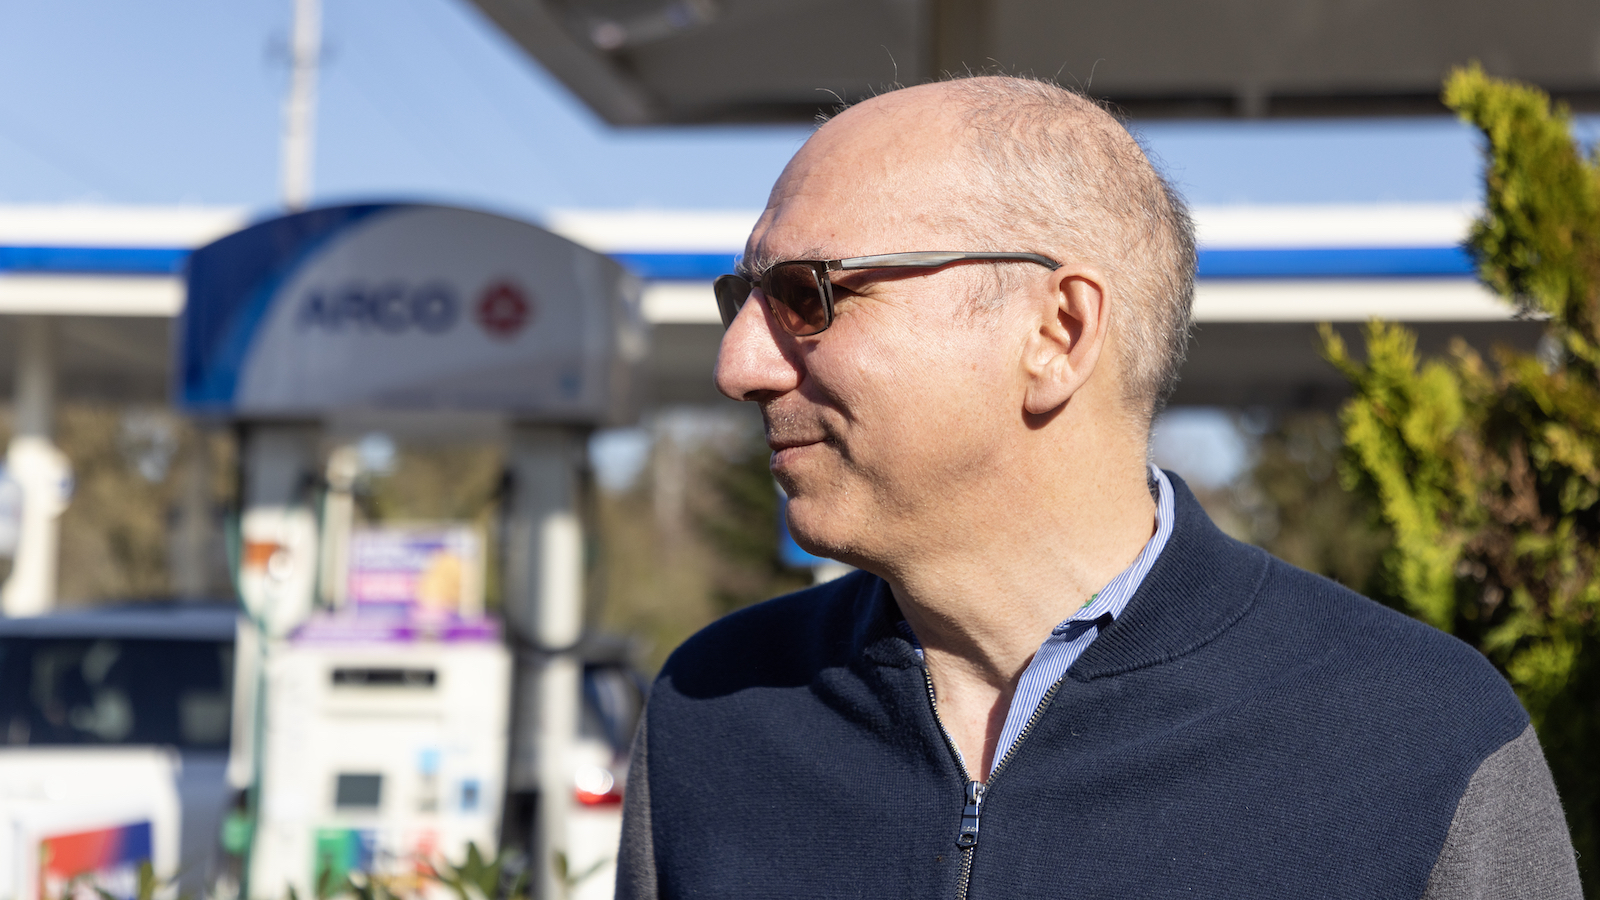 a bald man with sunglasses in front of an ARCO station